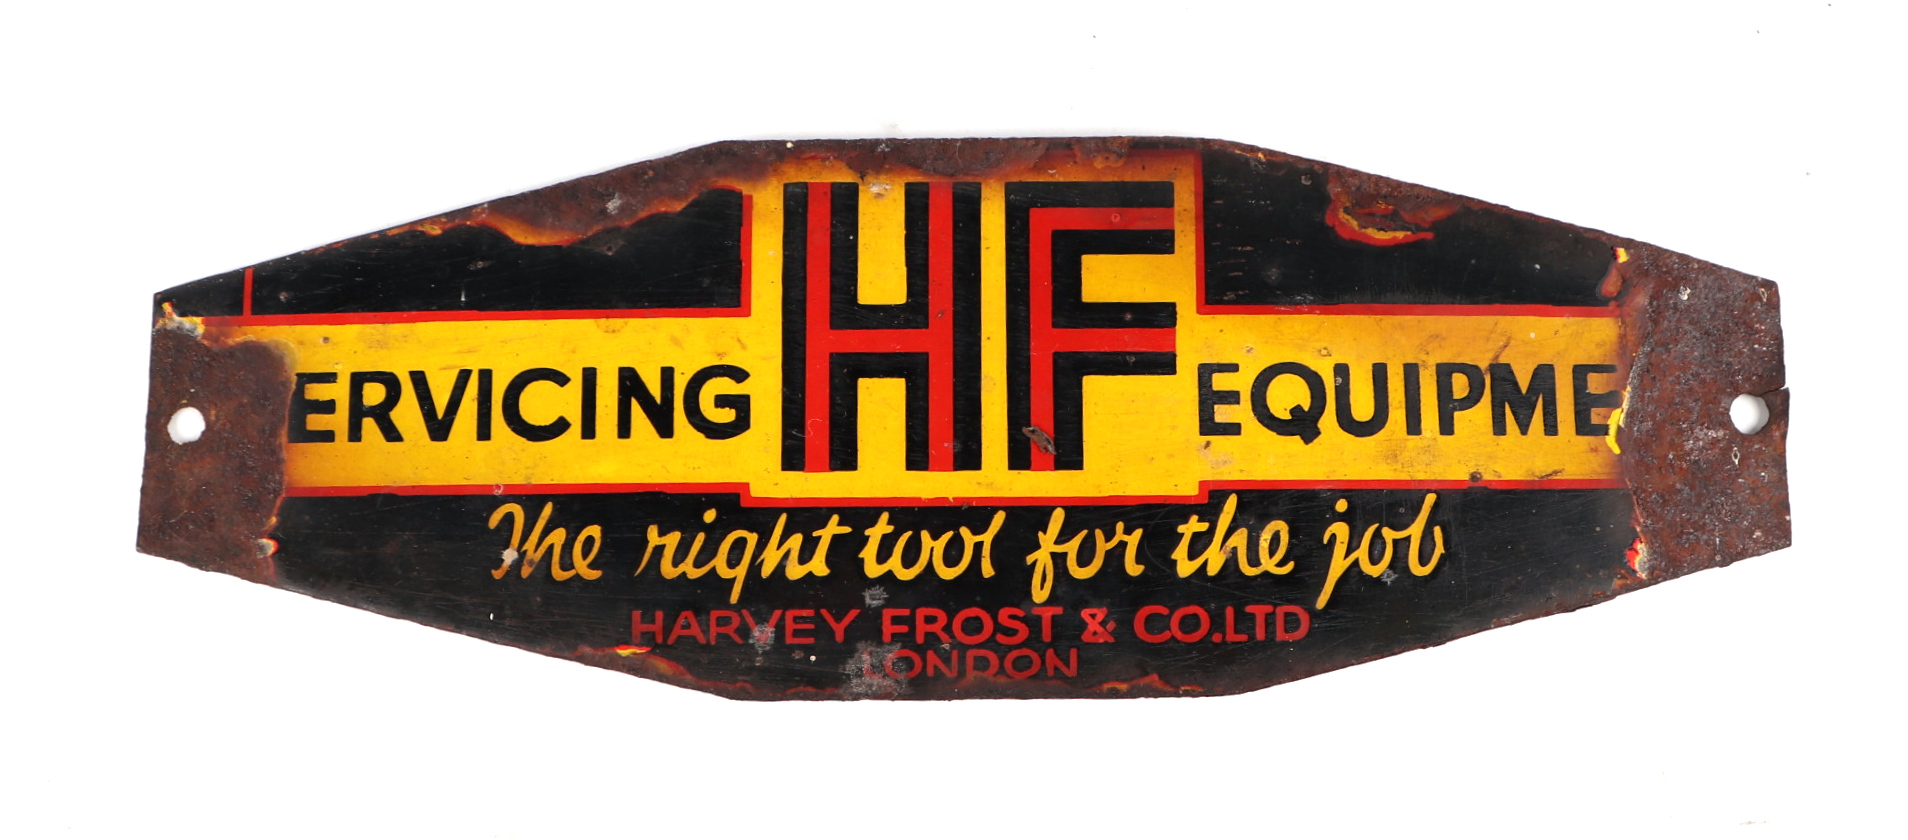 An original small Harvey Frost & Co. Ltd London enamel sign, H S Servicing Equipment, 23cms by 8cms.